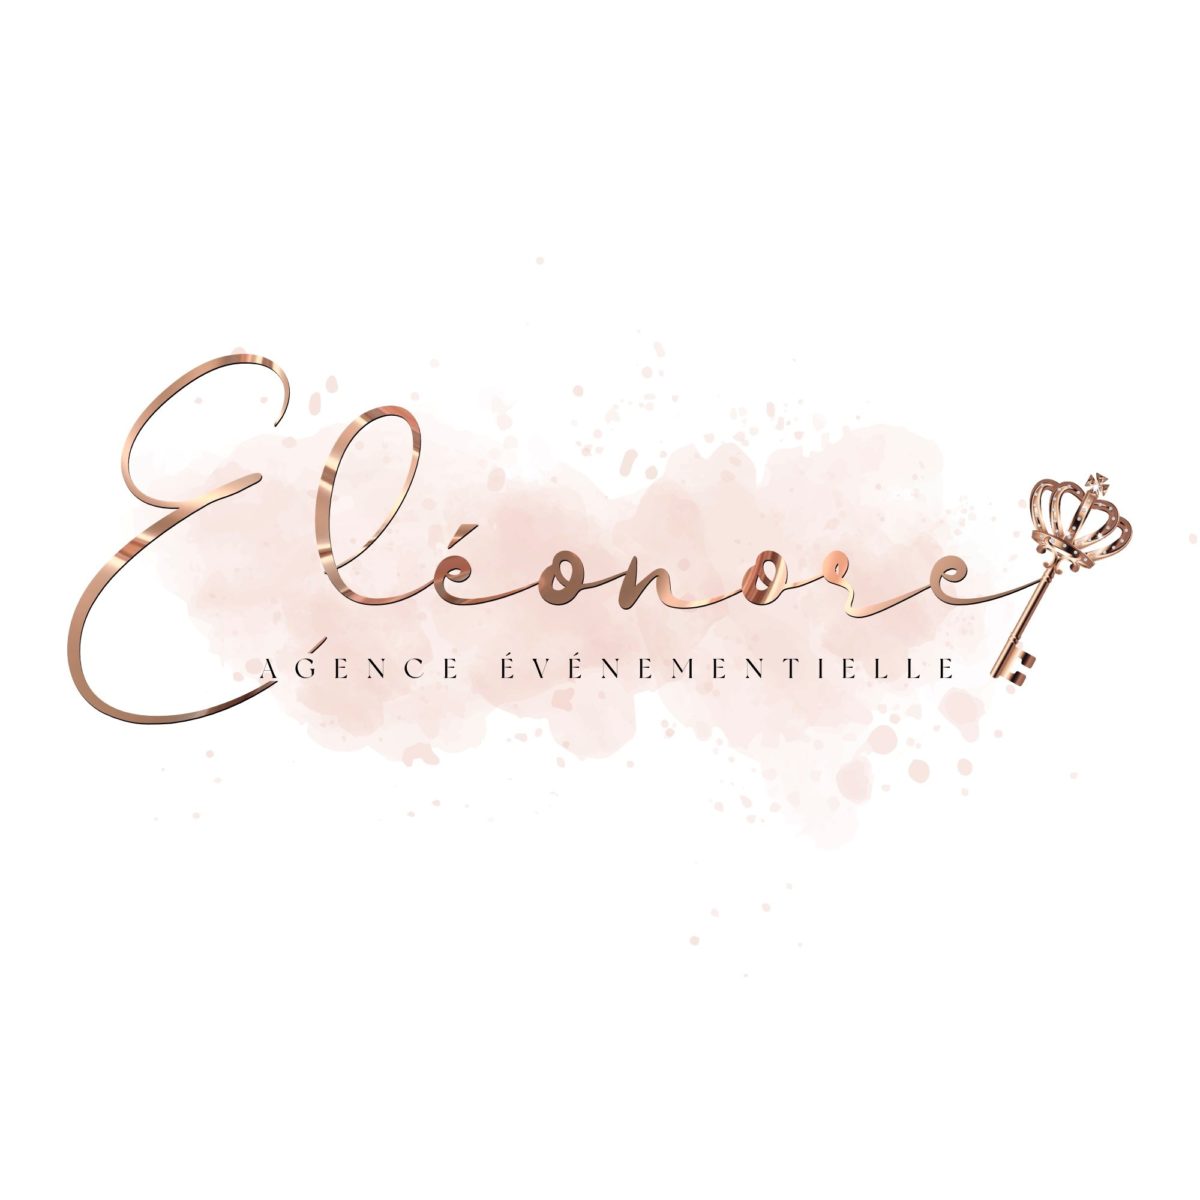 Eléonore agence Events